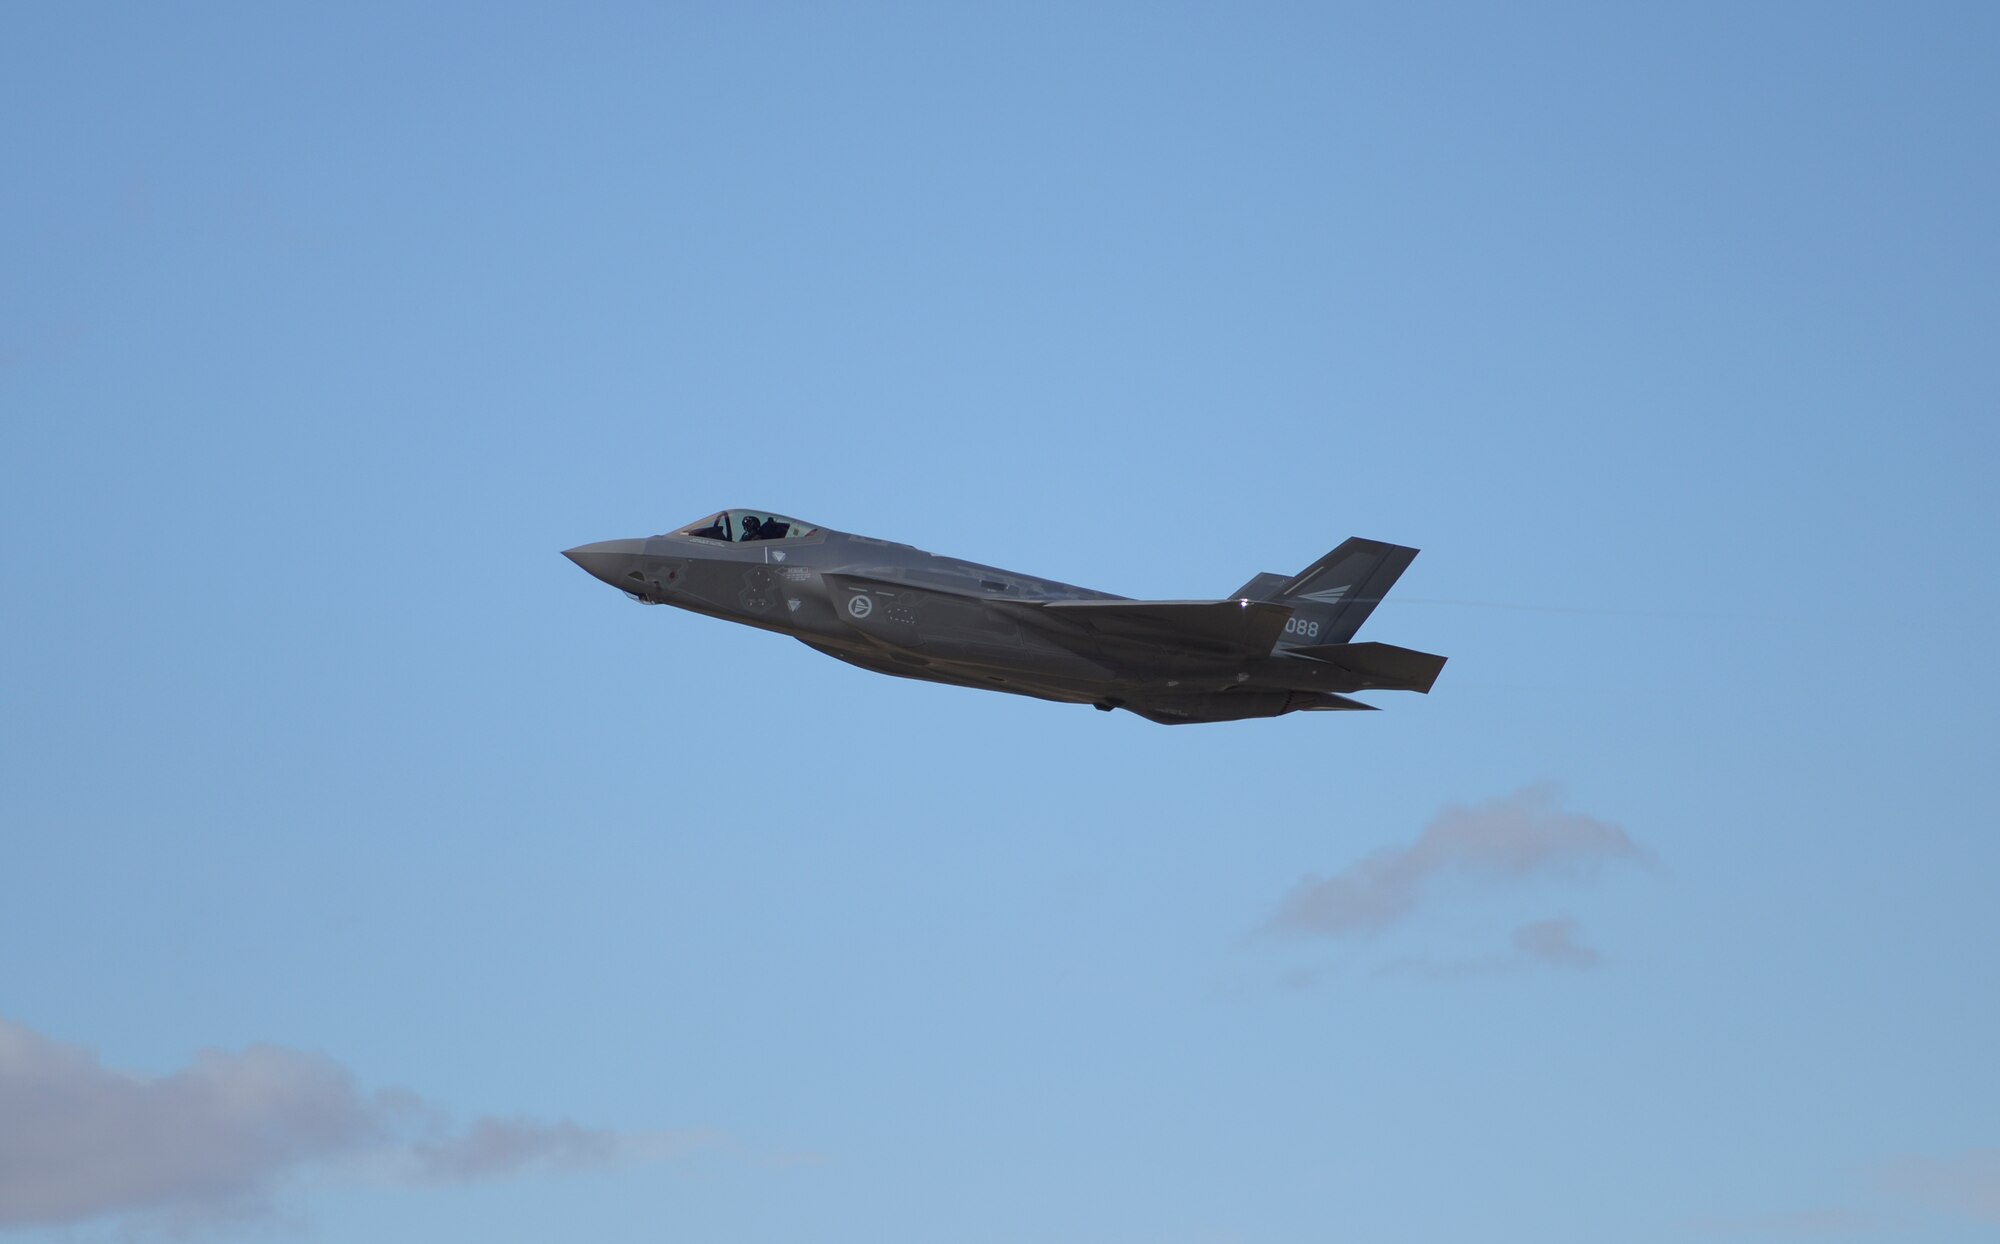 One of the first two Norwegian F-35s soars through the air under the control of Norwegian Maj. Morten Hanche, 62nd Fighter Squadron F-35 student pilot, Dec. 14, 2015, at Luke Air Force Base. Hanche engaged in simulated close air support in coordination with ground forces as an exercise during the sortie. (U.S. Air Force photo by Airman 1st Class Ridge Shan)